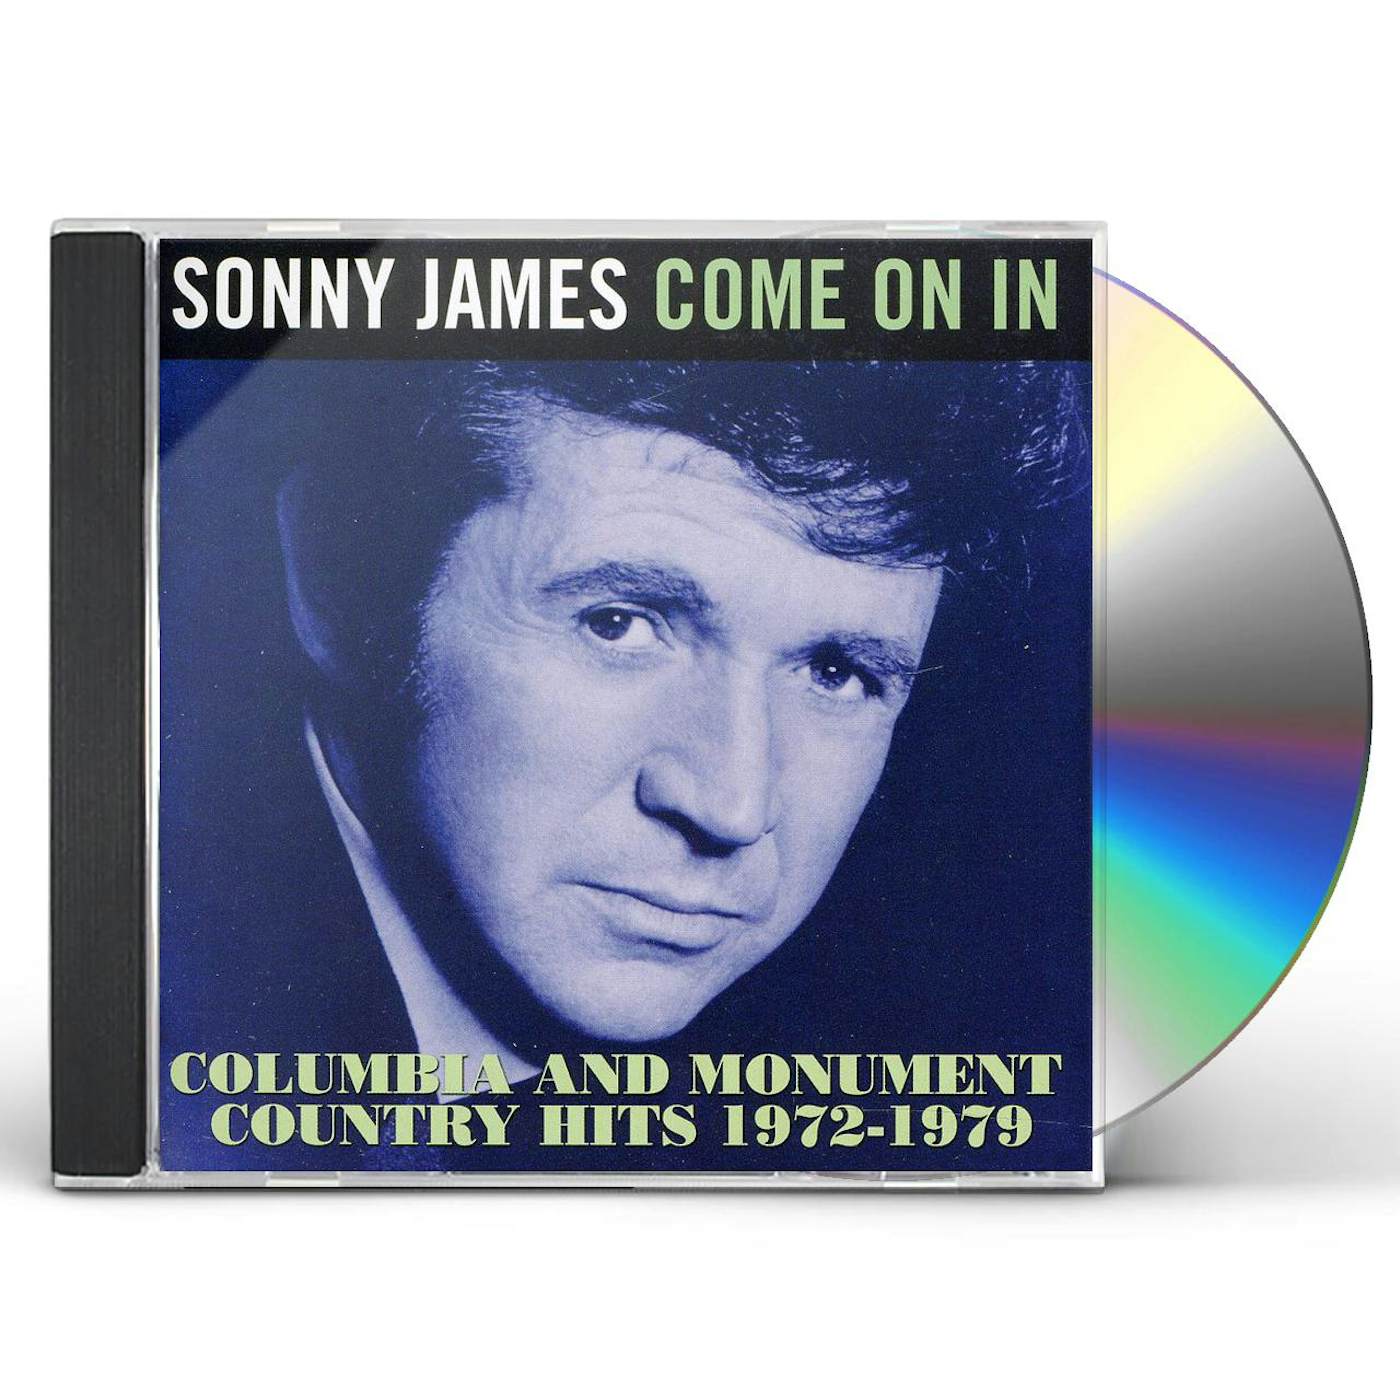 Sonny James COME ON IN: COLUMBIA & MONUMENT COUNTRY 1972-1979 CD